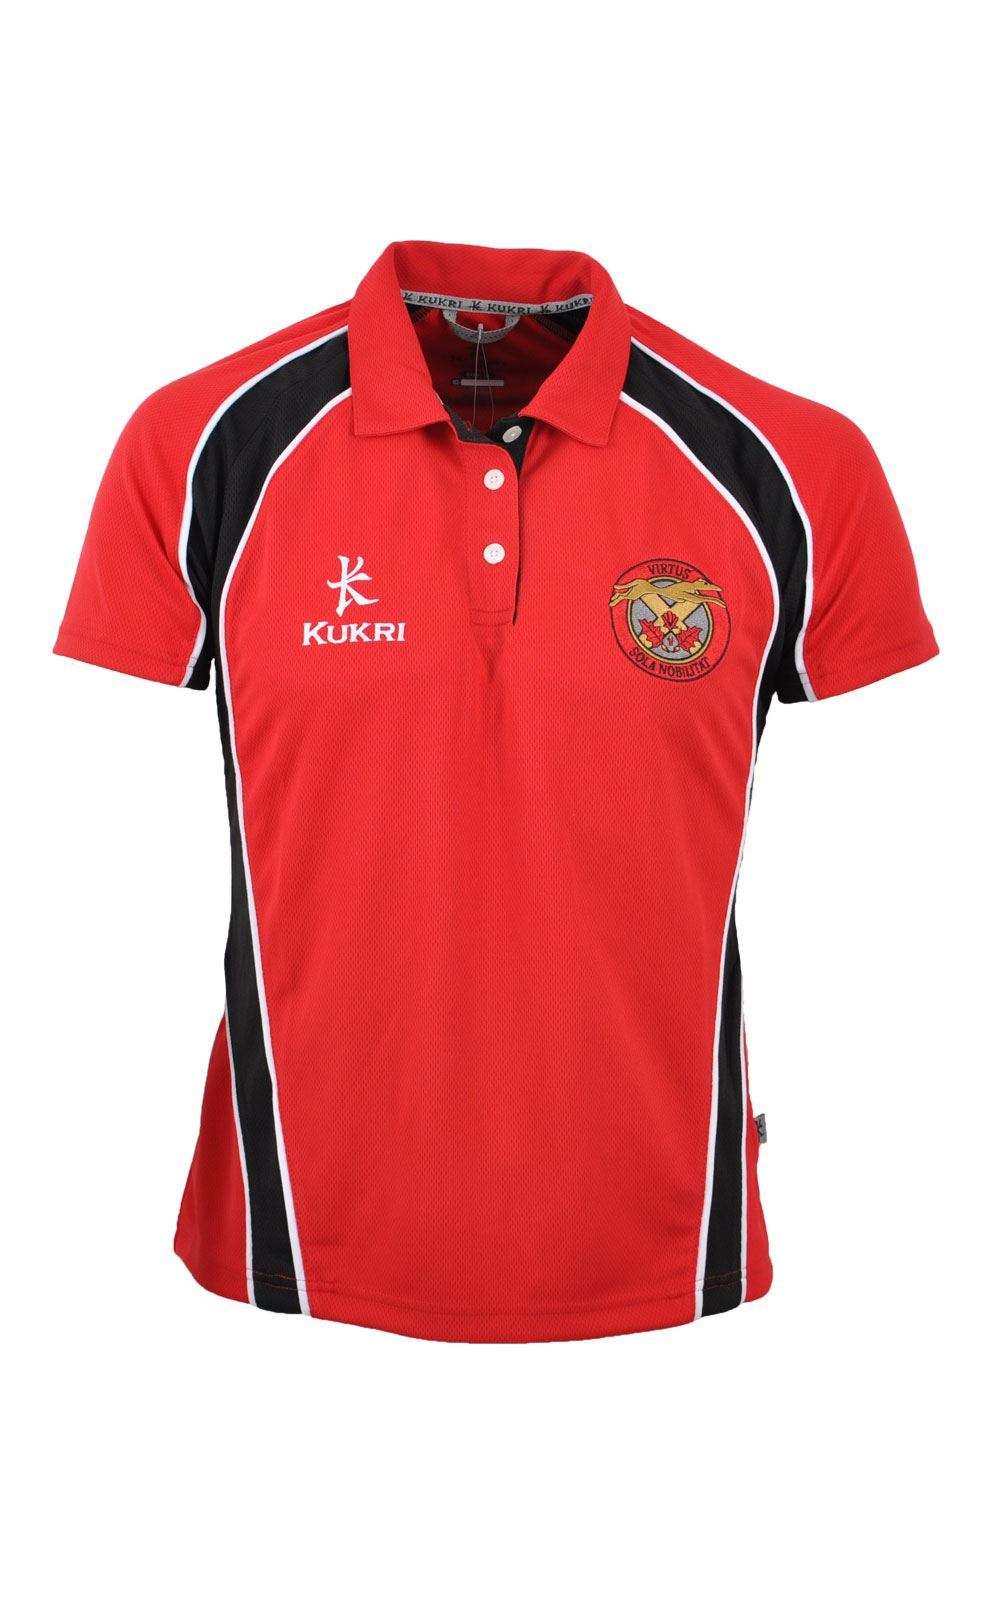 Picture of Limavady HS Hockey Top - Kukri